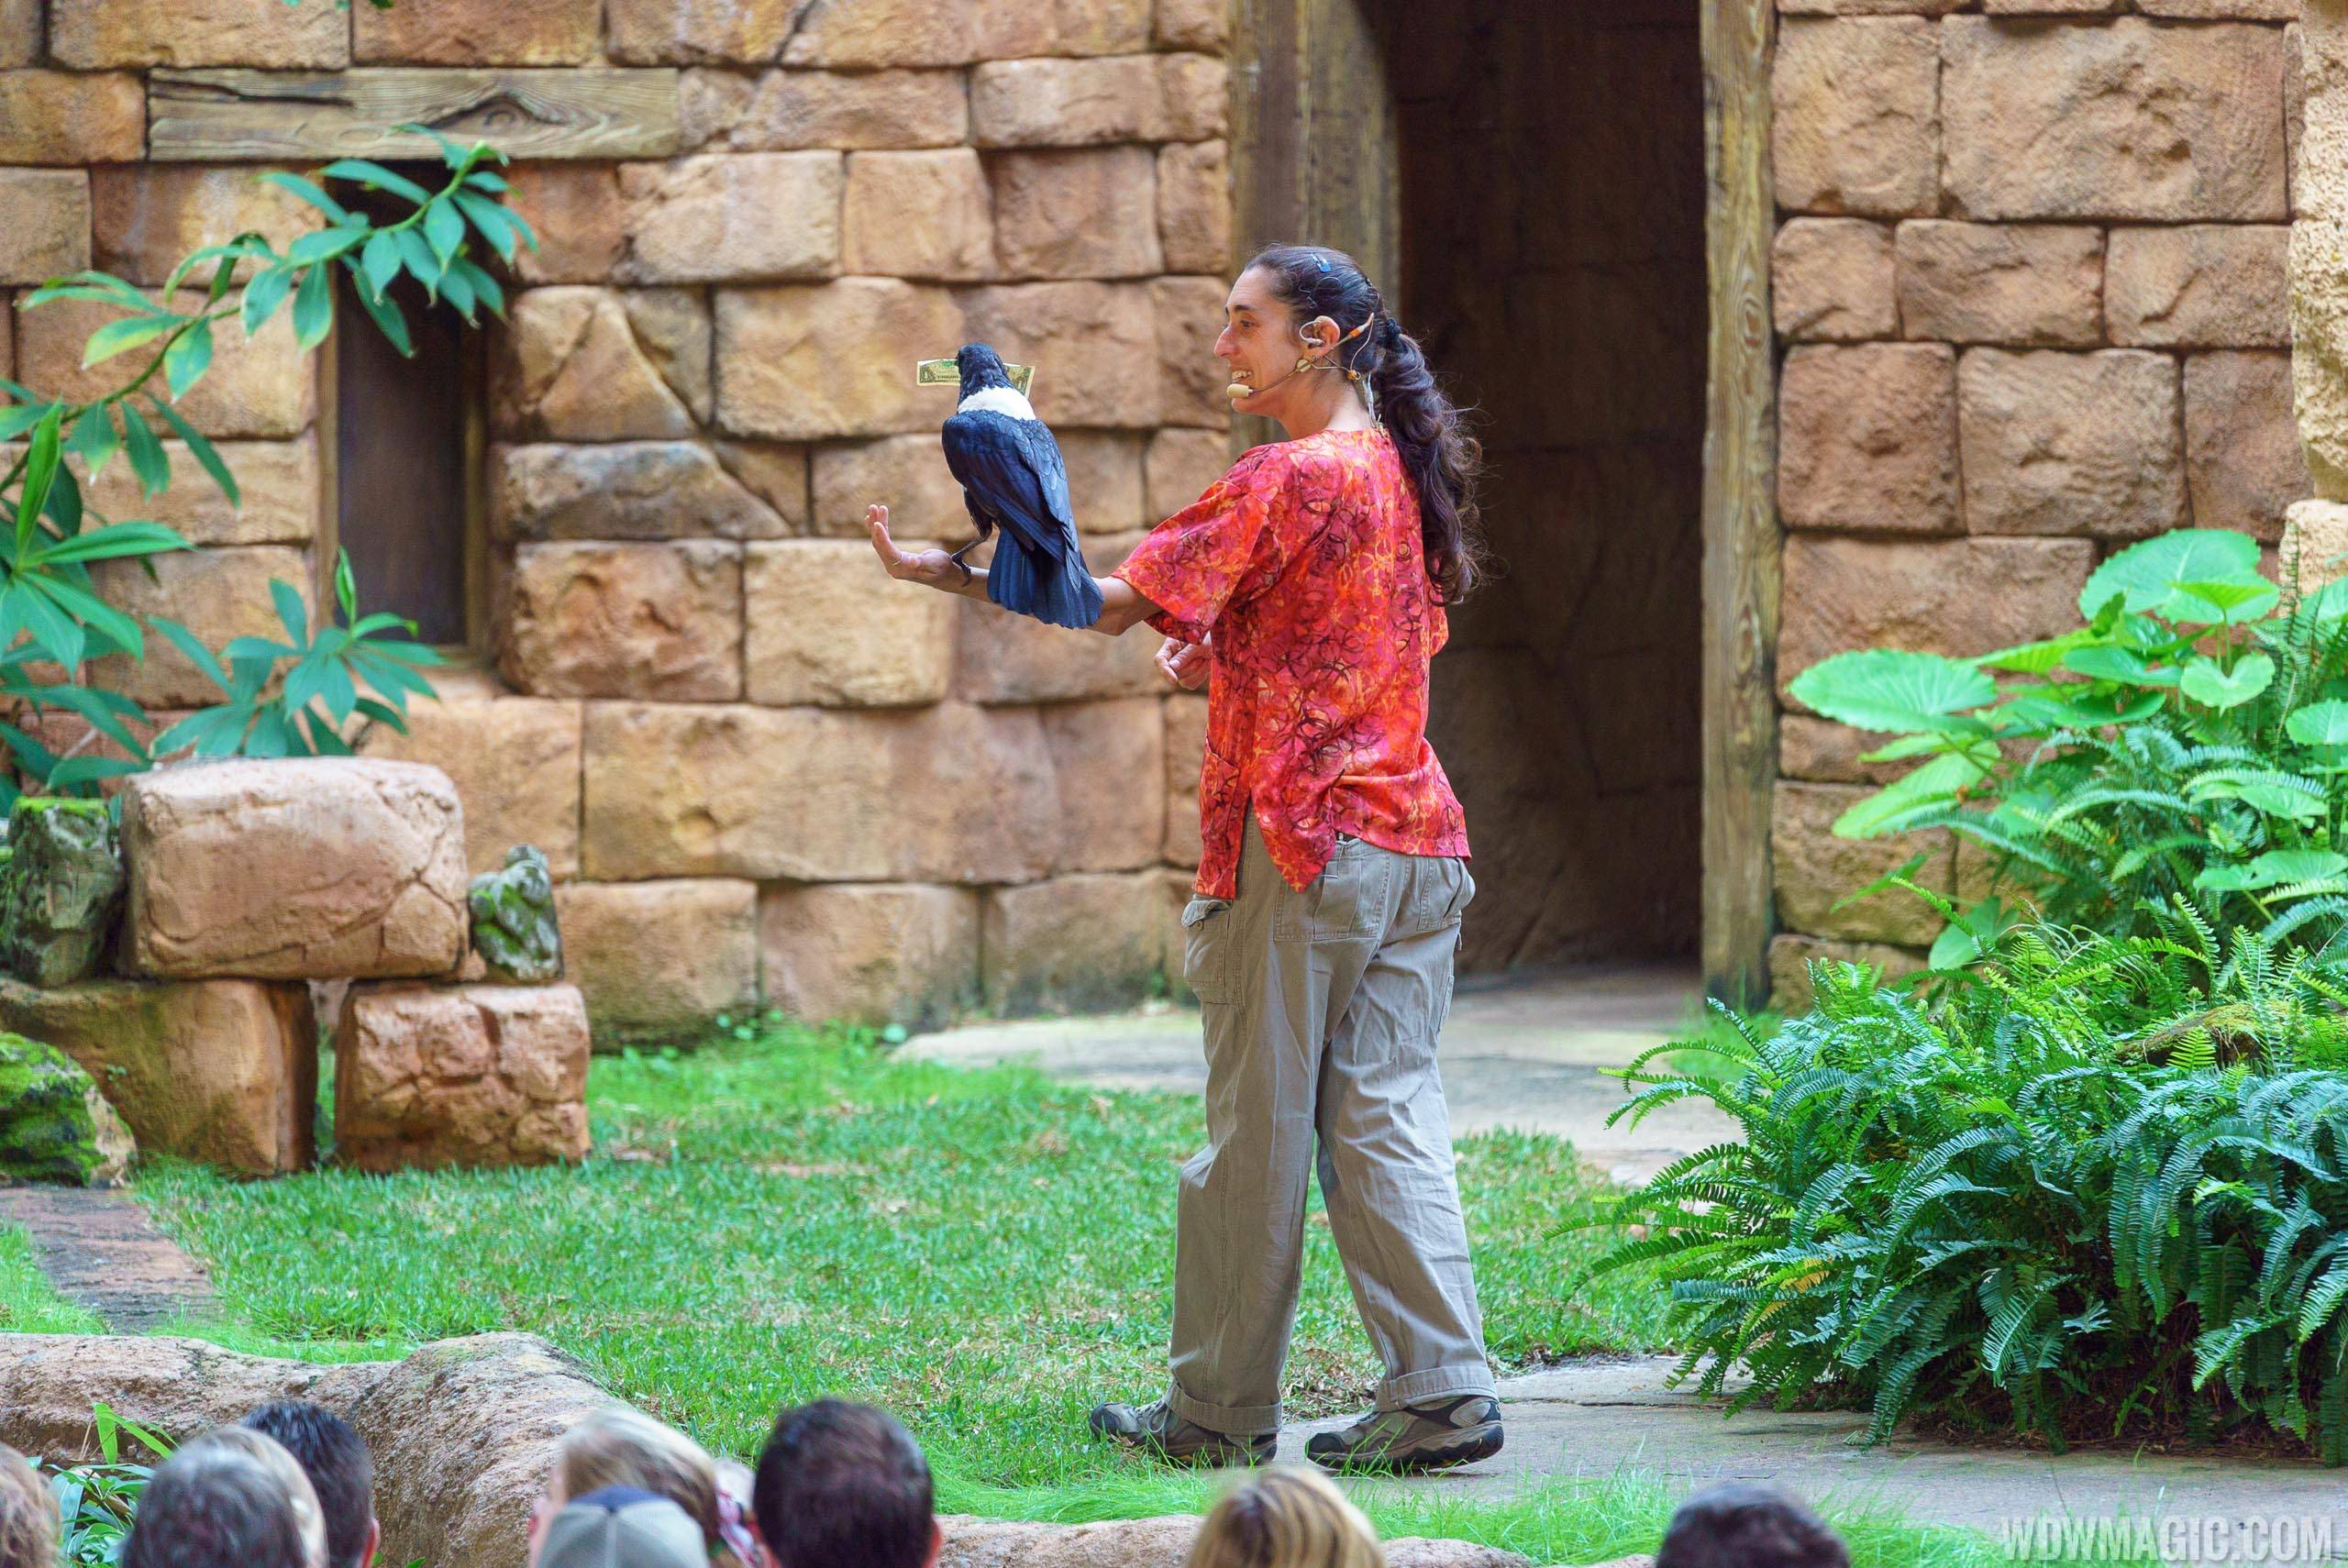 Flights of Wonder bird shows expand to other areas of Disney's Animal Kingdom